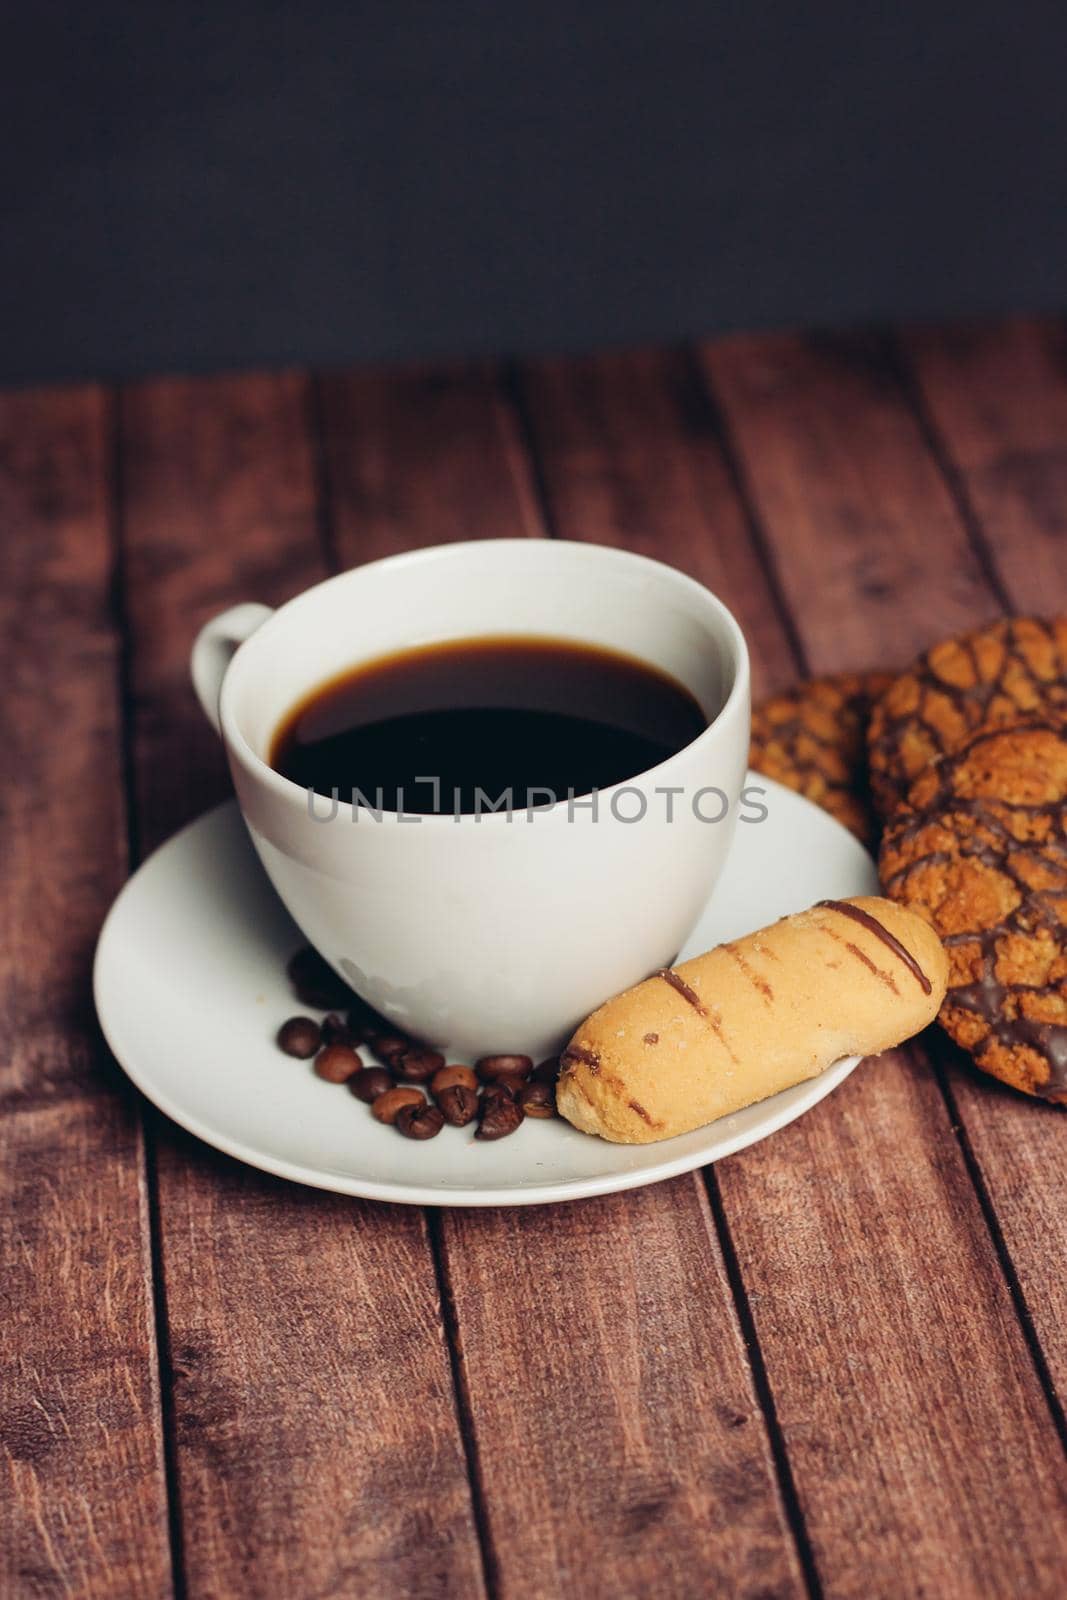 sweet biscuits breakfast snack tradition tea party. High quality photo